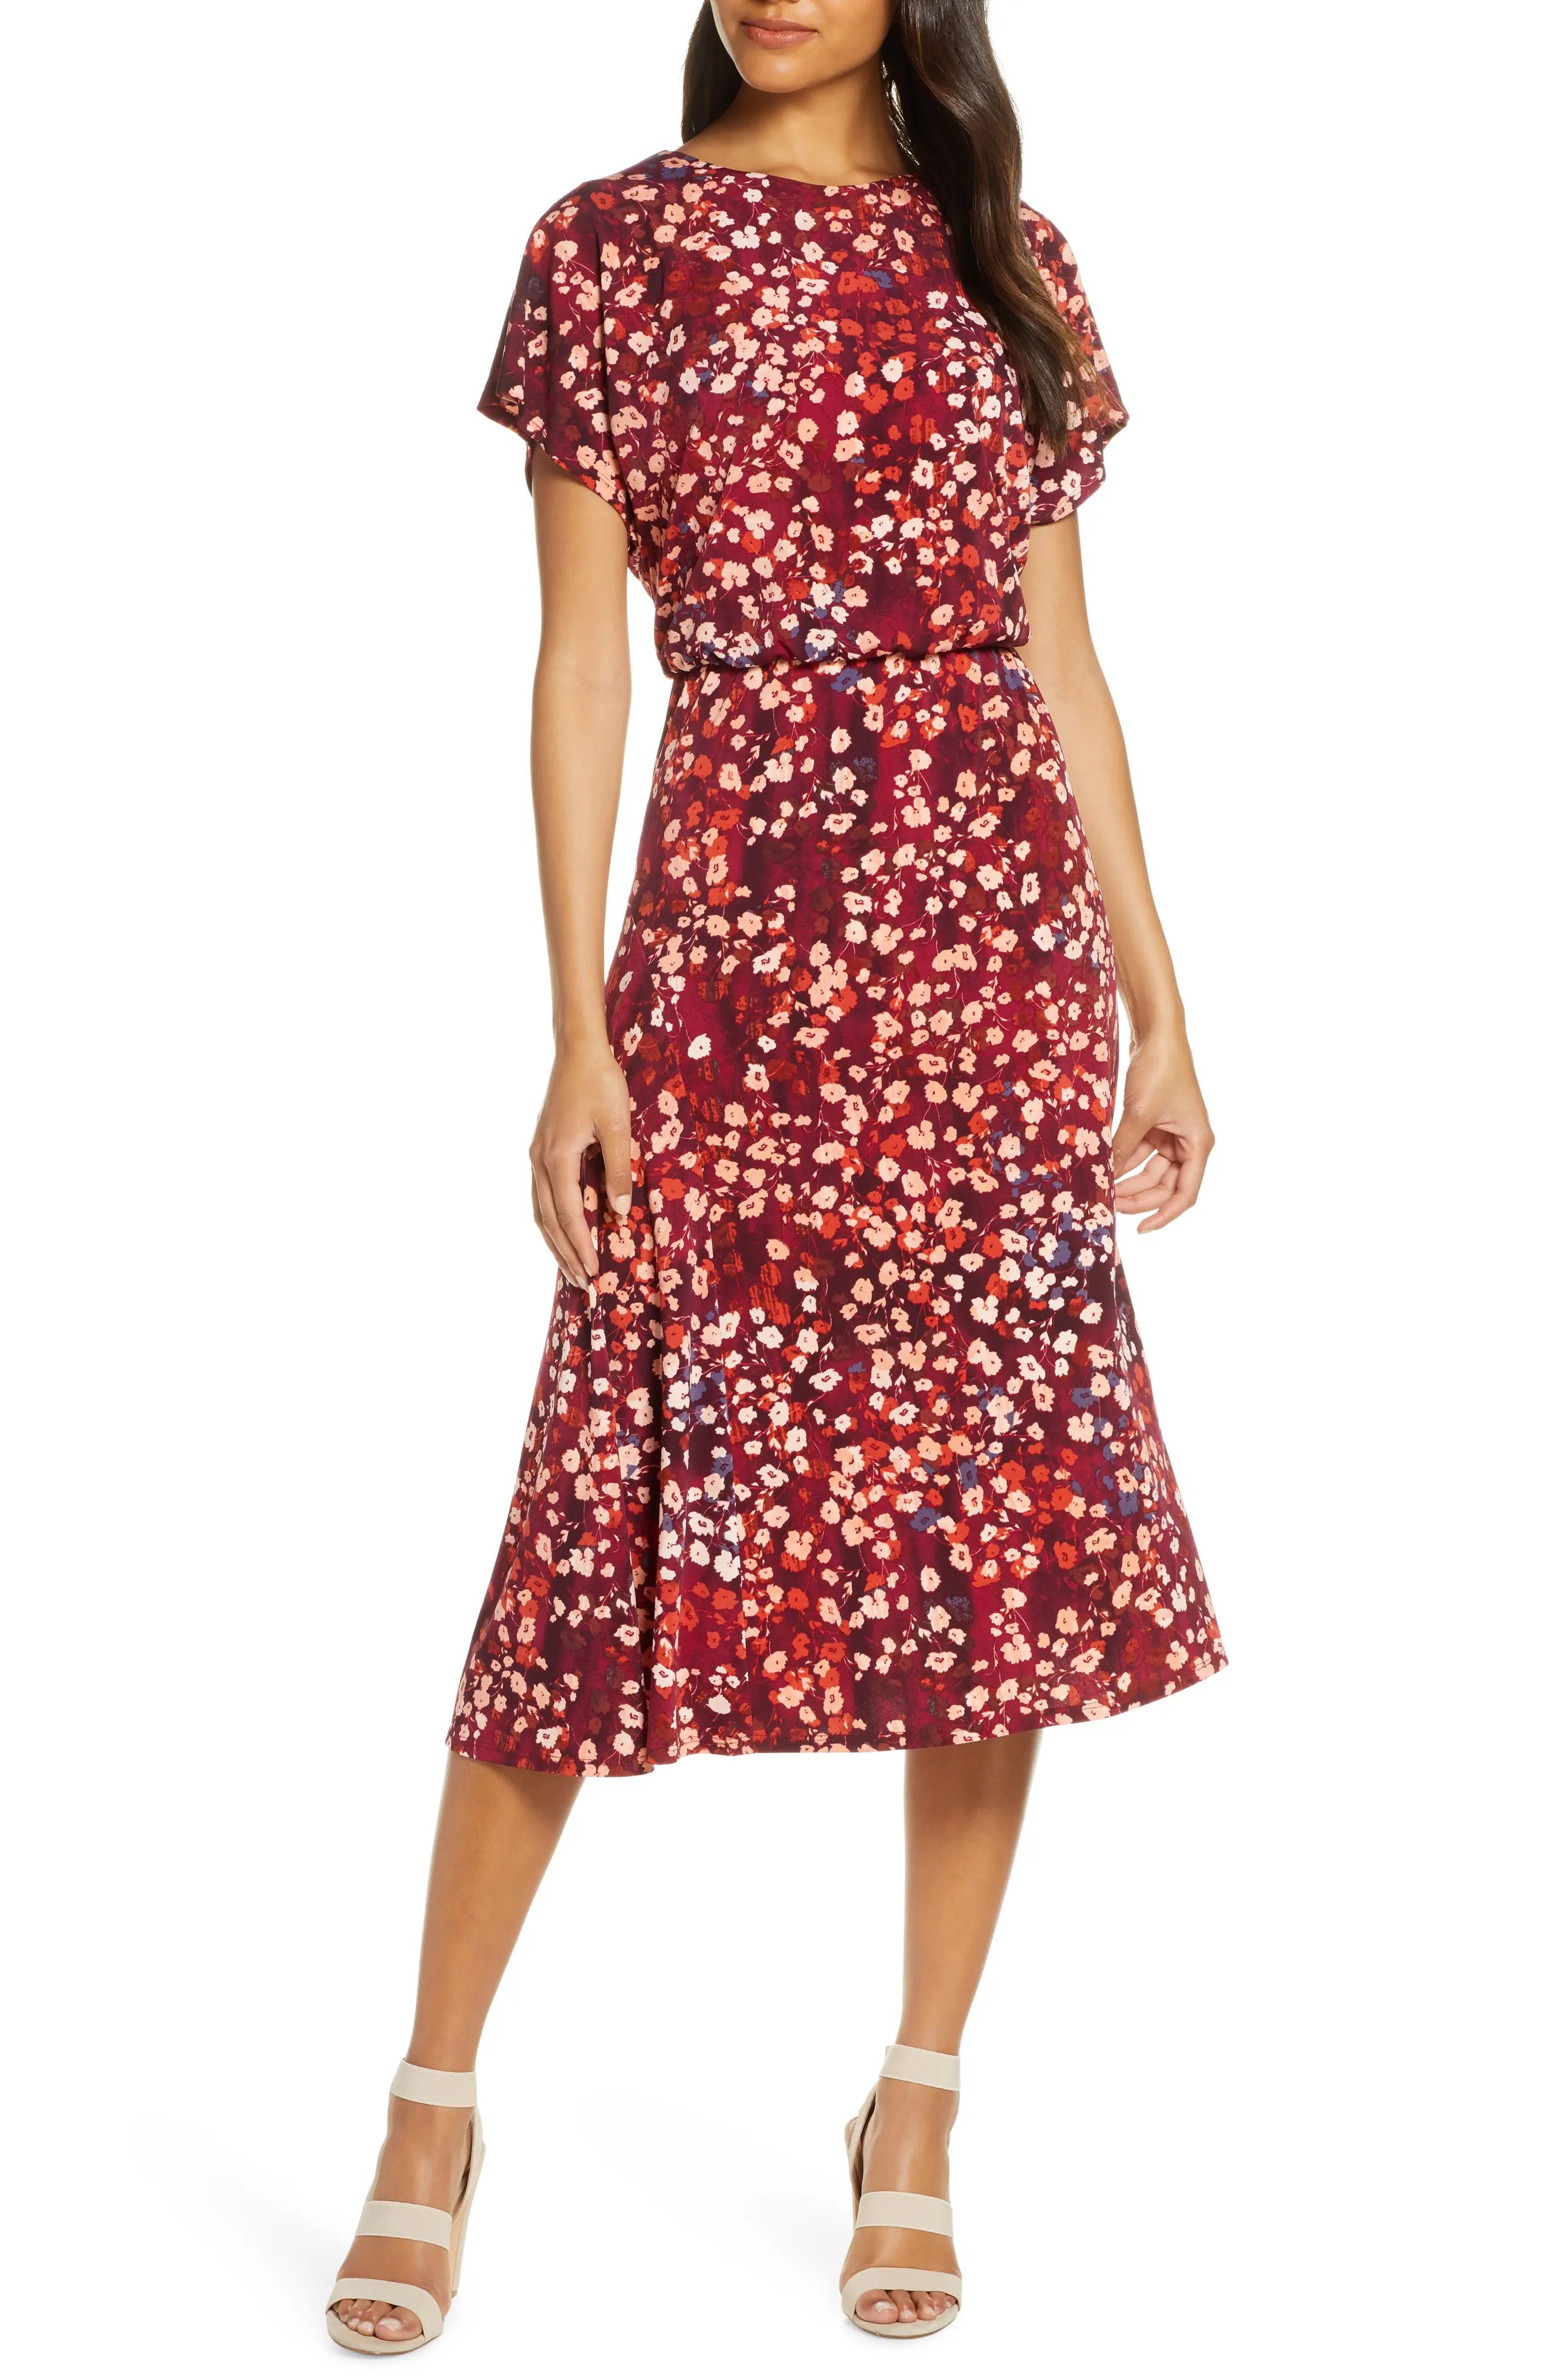 Women's Maggy London Floral A-Line Dress, Size 6 - Burgundy | Nordstrom